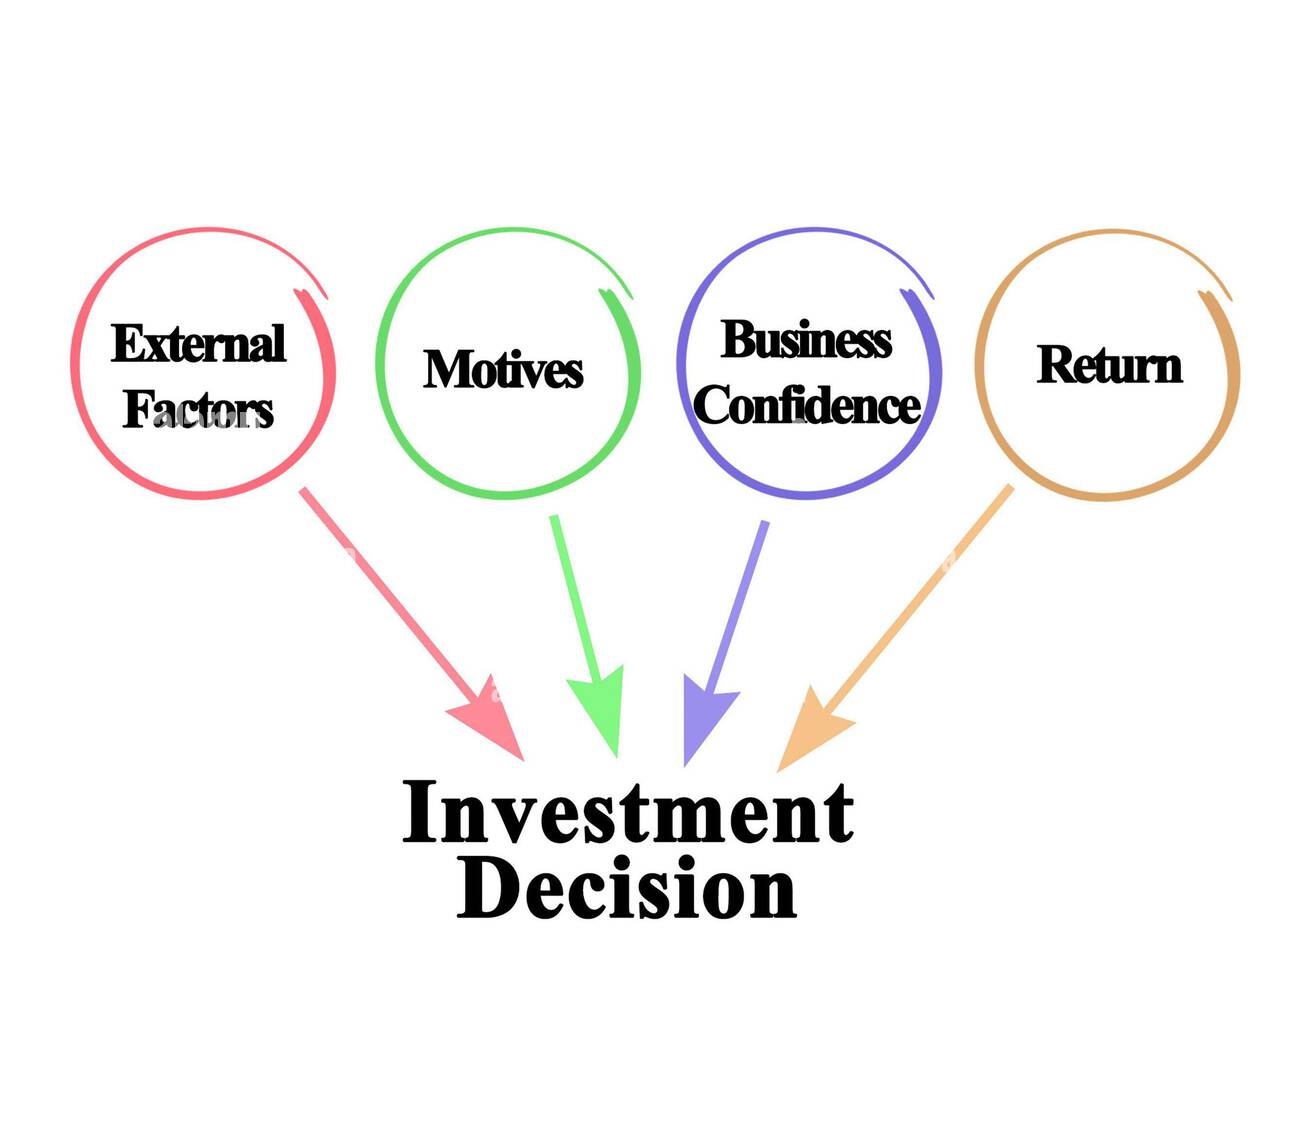 Investments Are Characterized By What Four Factors?